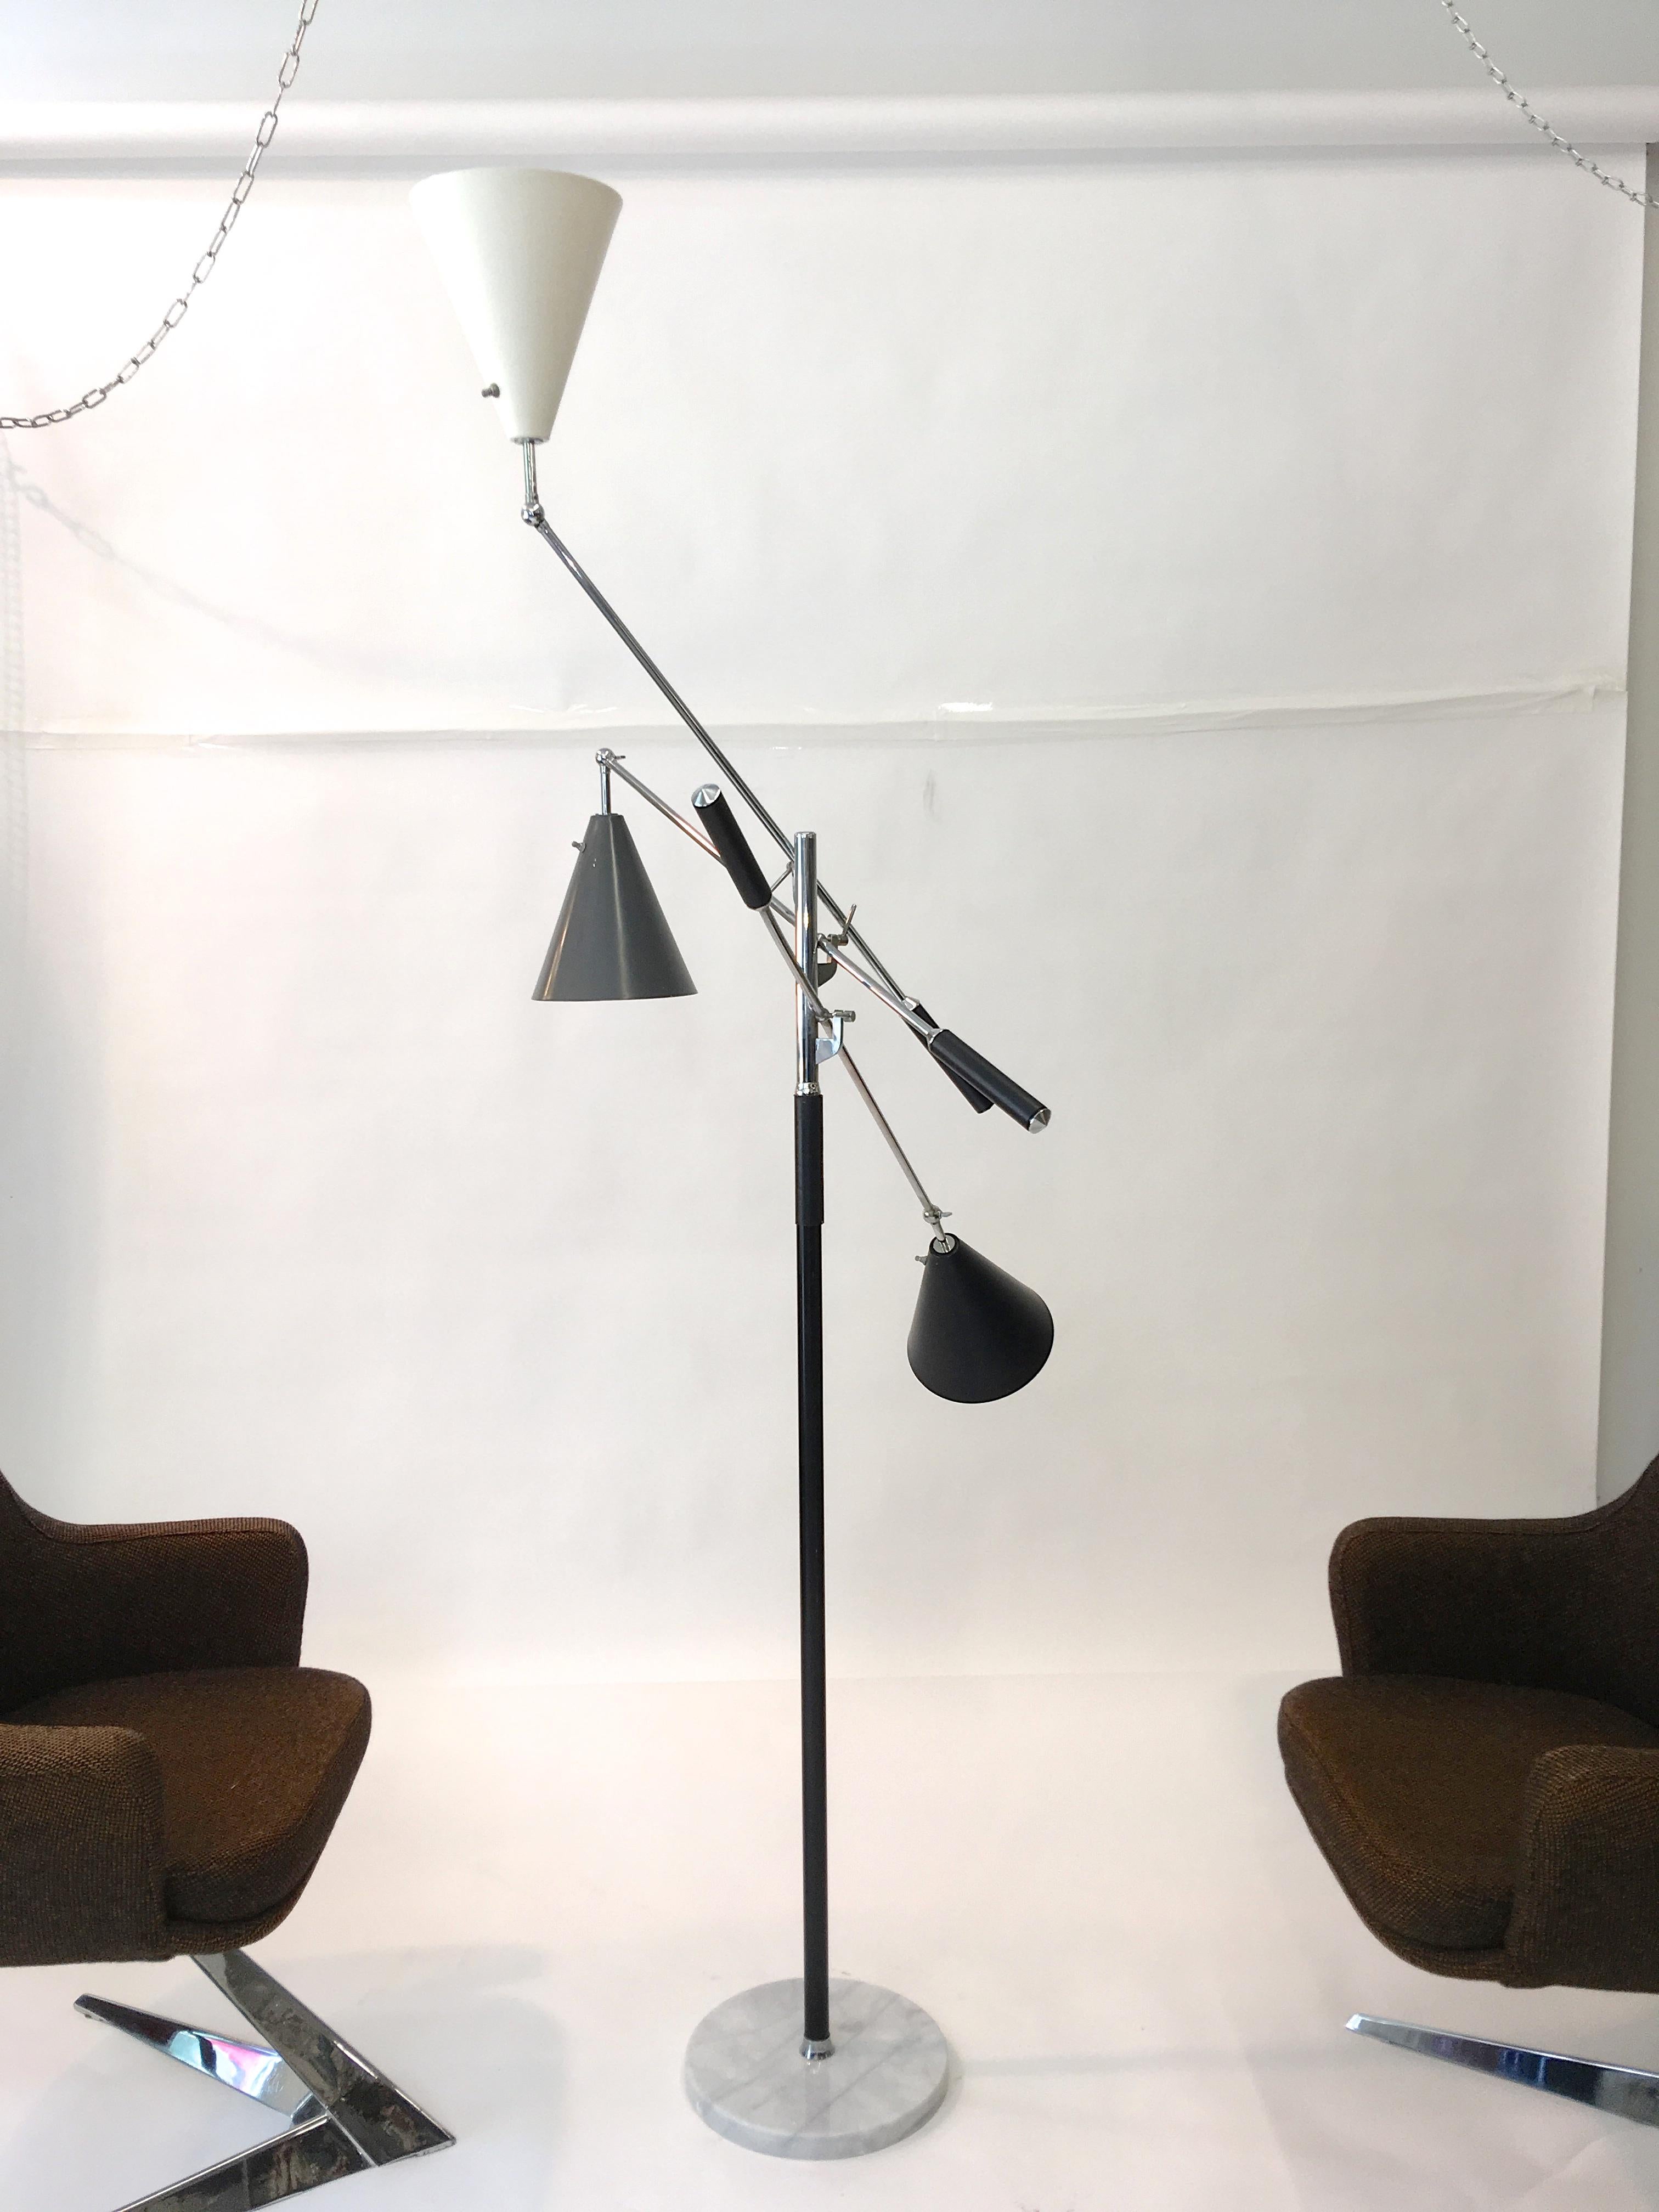 Angelo Lelii's 1951 Triennale Award winning three-arm floor lamp produced in Italy for export by Denis Casey for Casey Fantin, Firenze and imported to the USA by Koch & Lowy. Marked 'Made in Italy